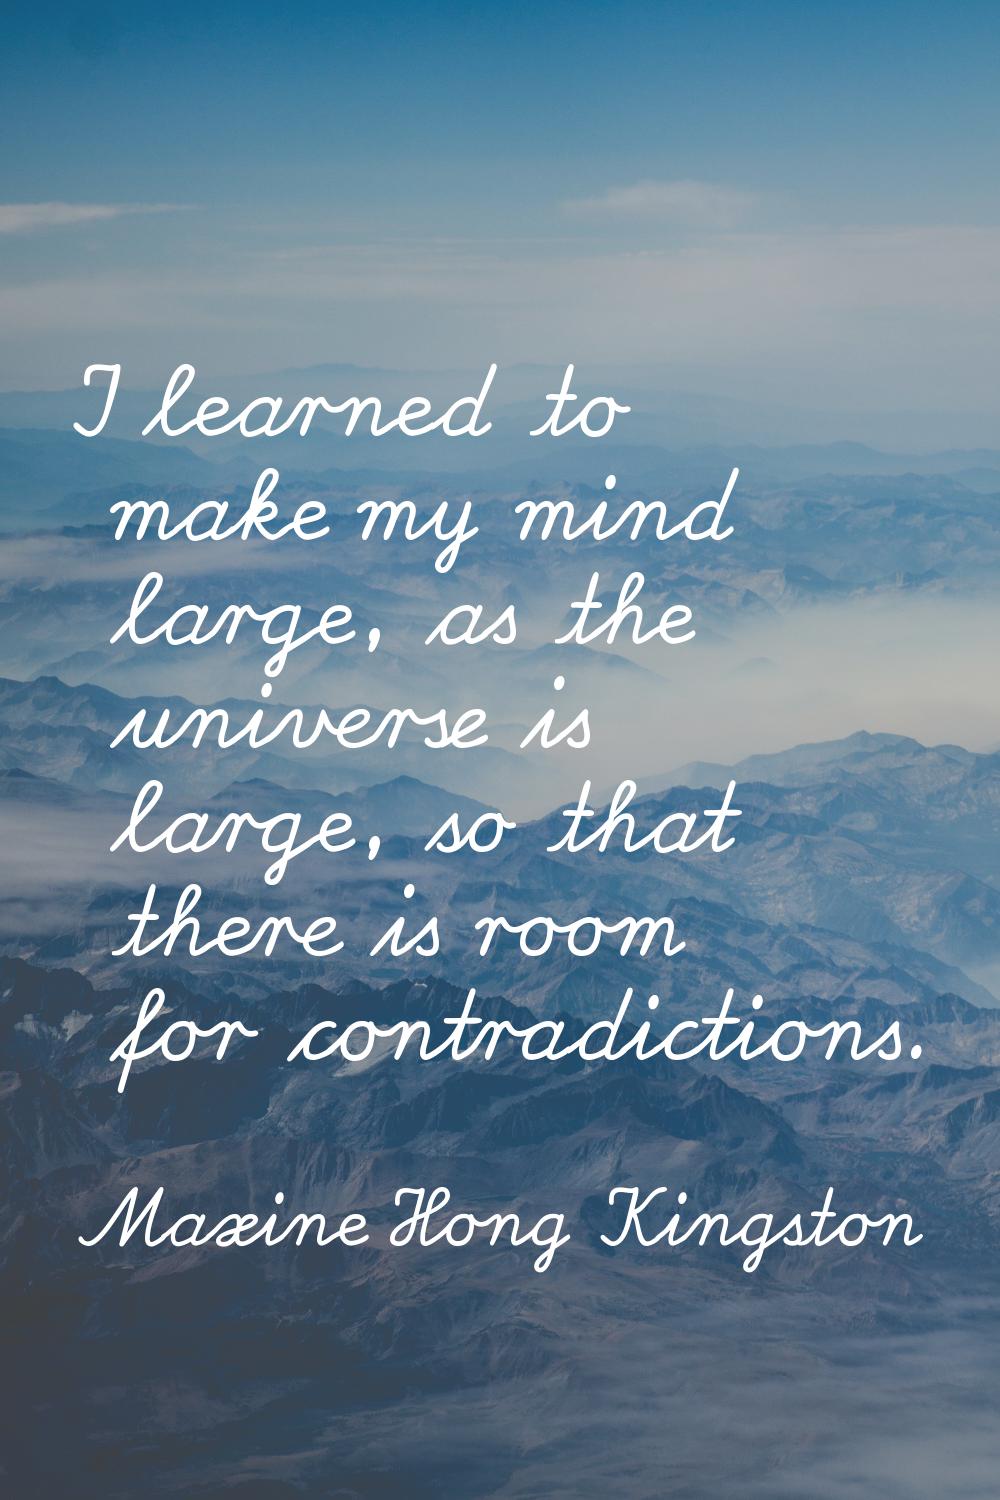 I learned to make my mind large, as the universe is large, so that there is room for contradictions